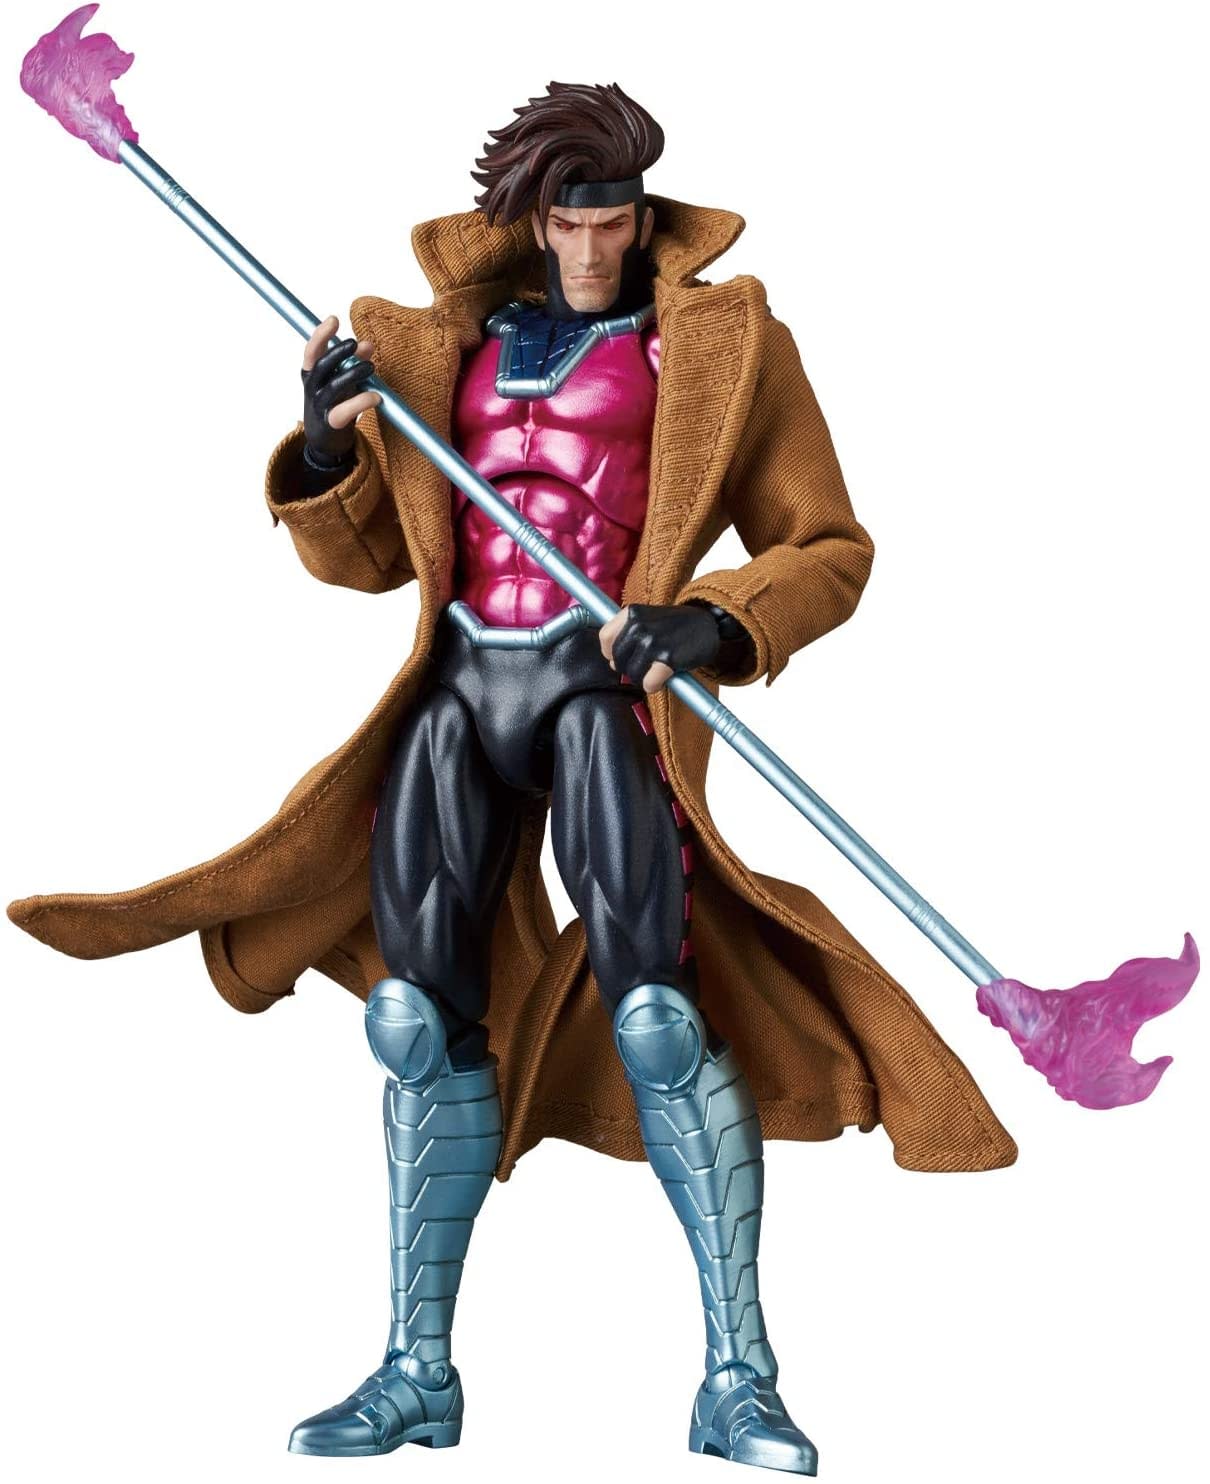 Gambit Draws a Lucky Hand in New MAFEX Figure From Medicom